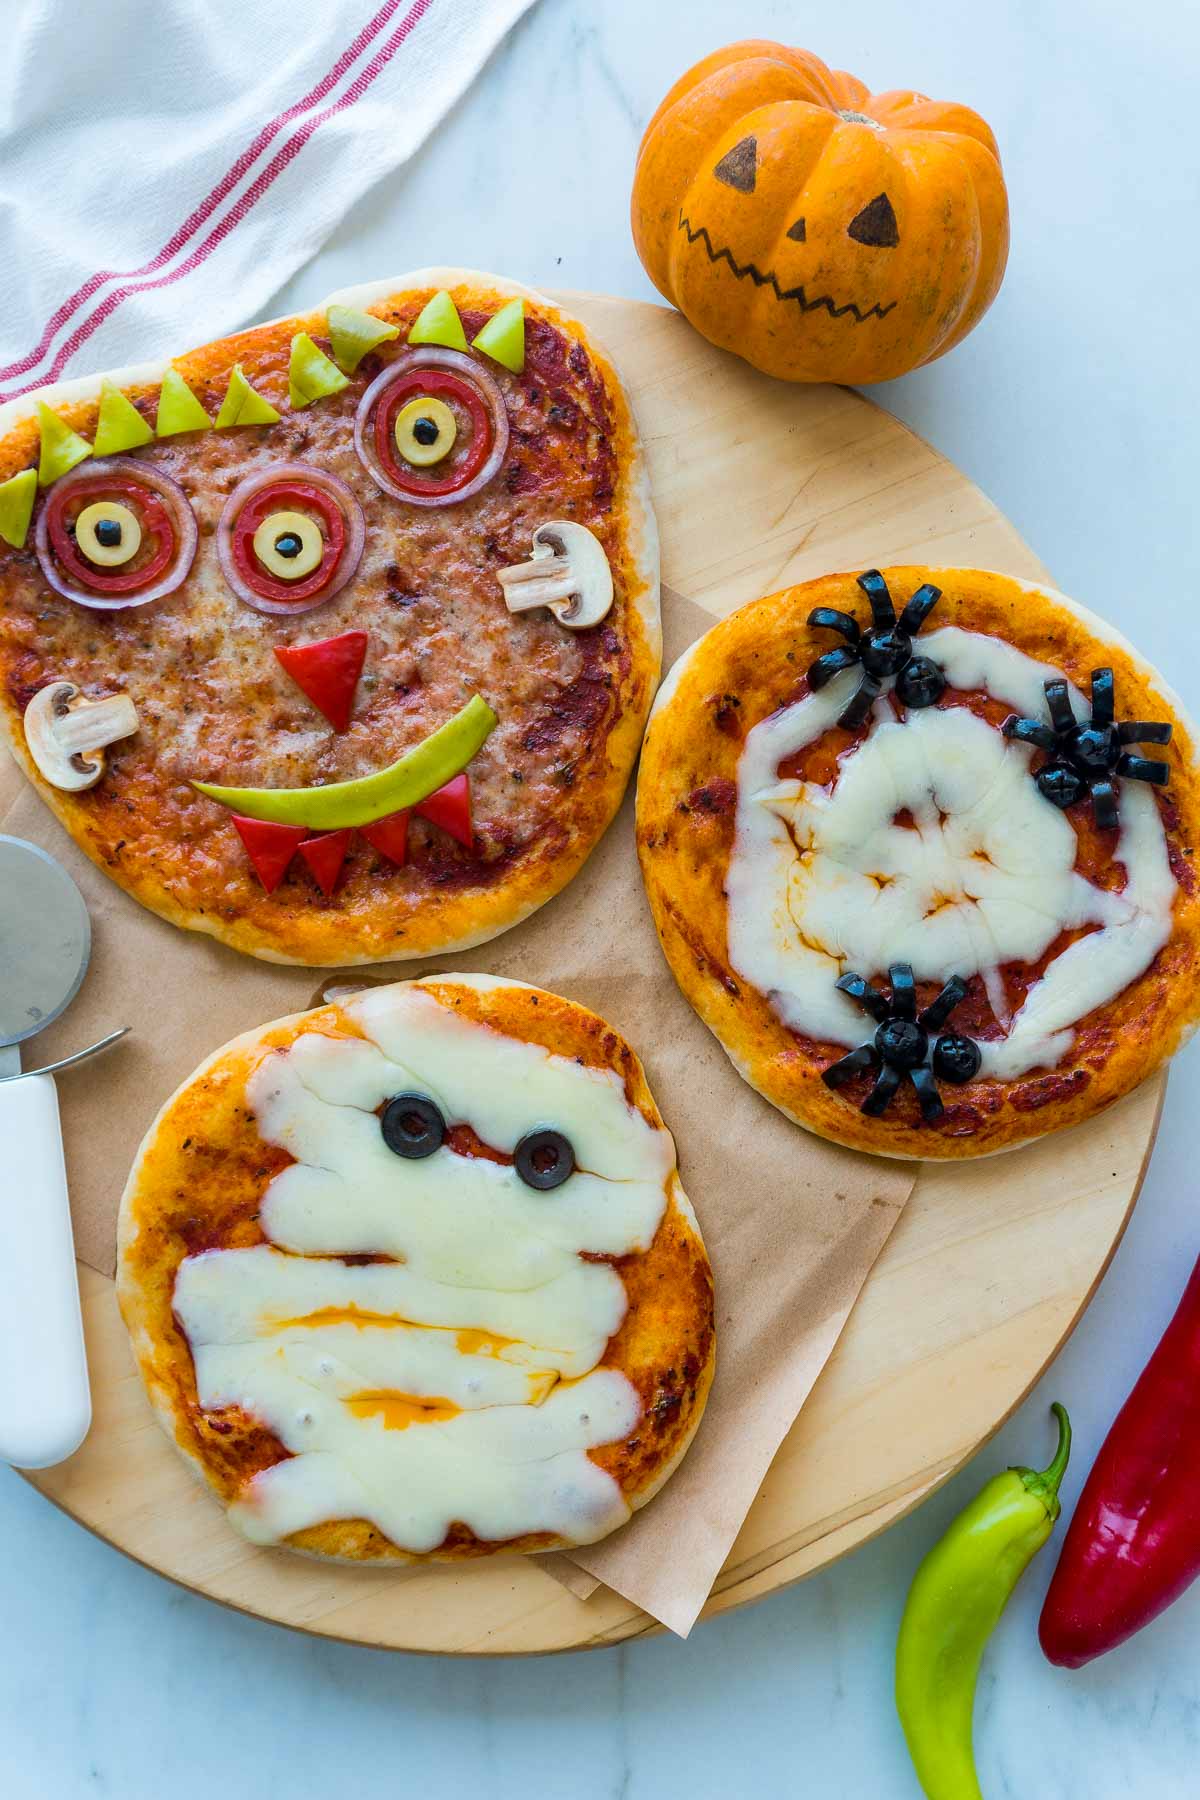 Three halloween pizzas on a wooden board with a pizza slicer and a pumpkin next to them.